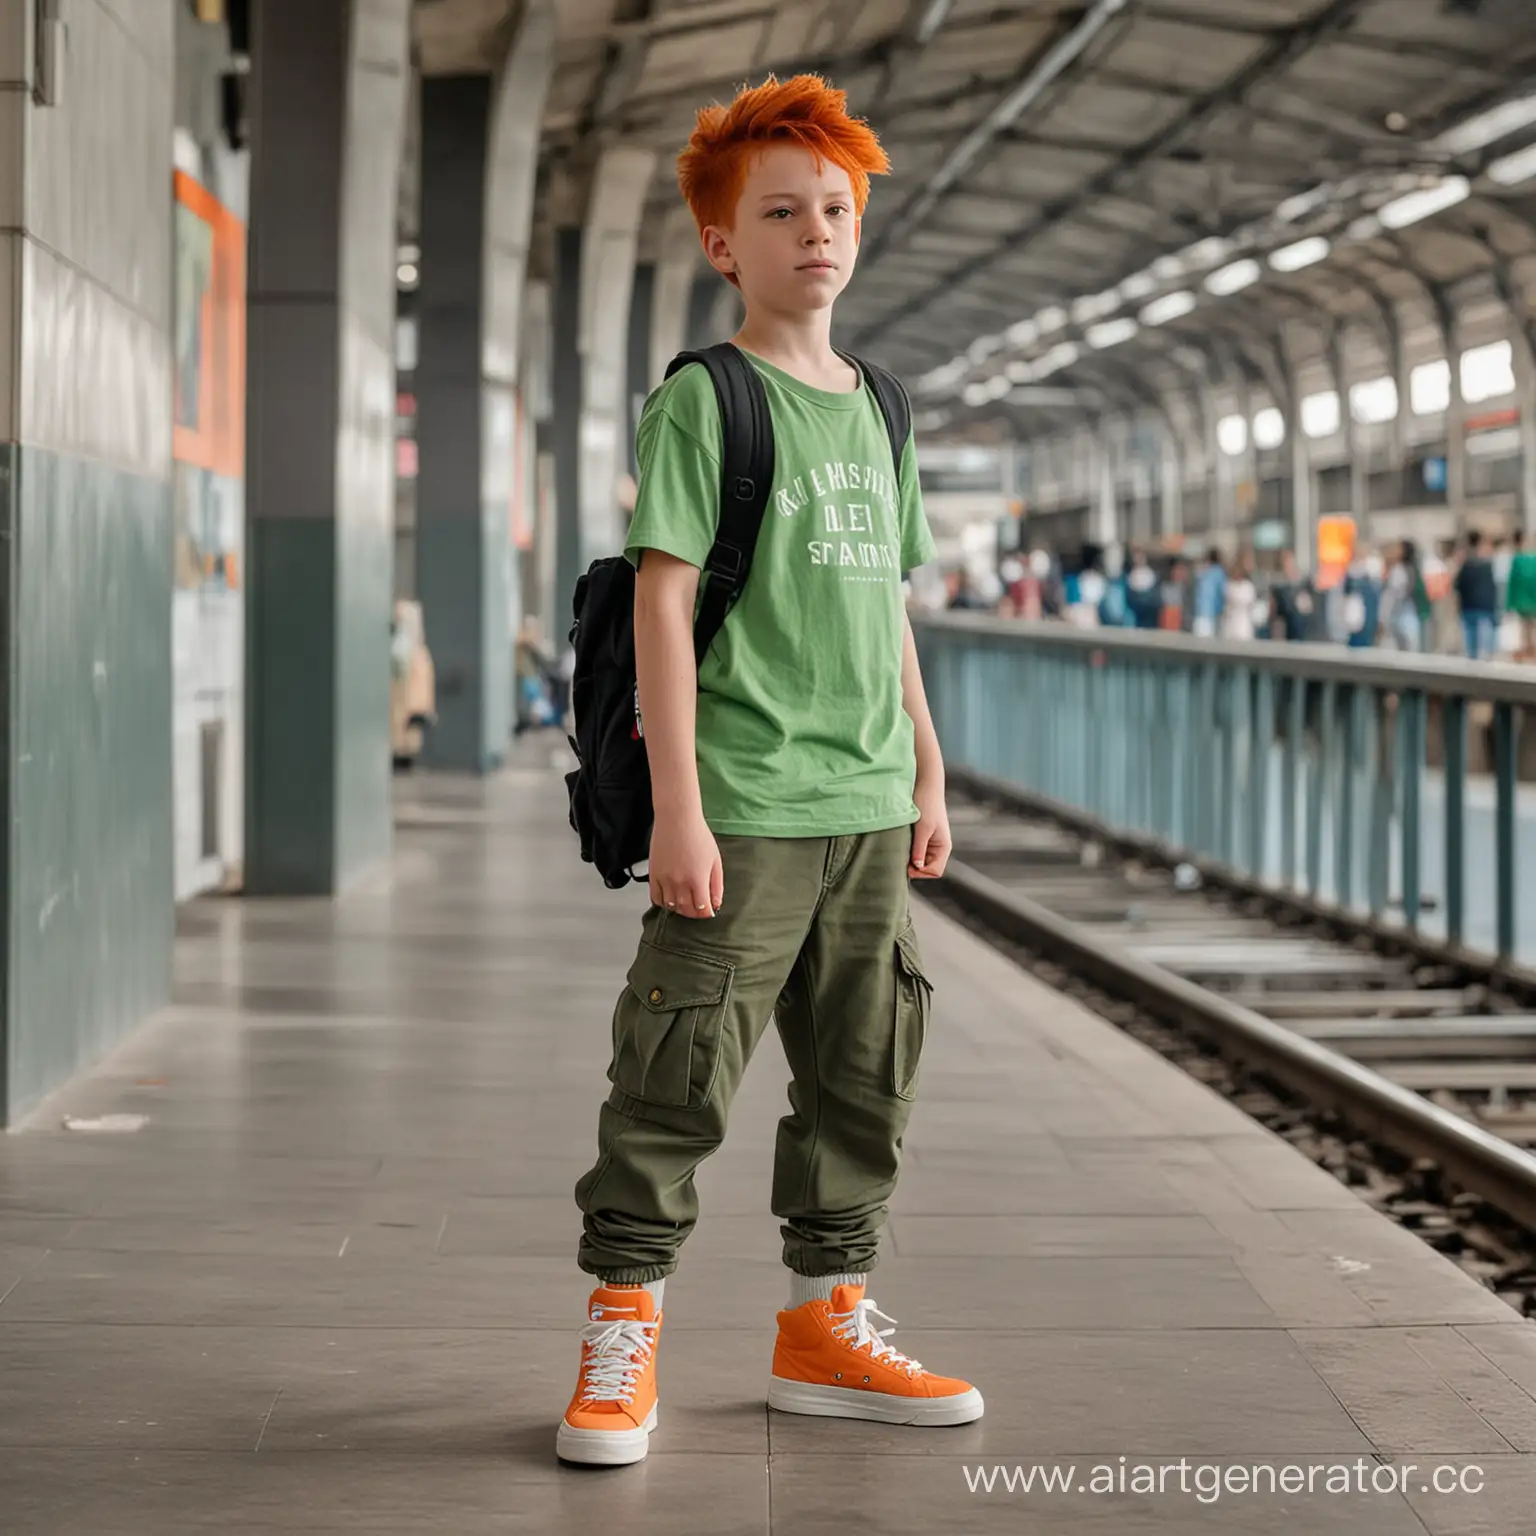 RedHaired-Boy-with-Gun-at-Metro-Station